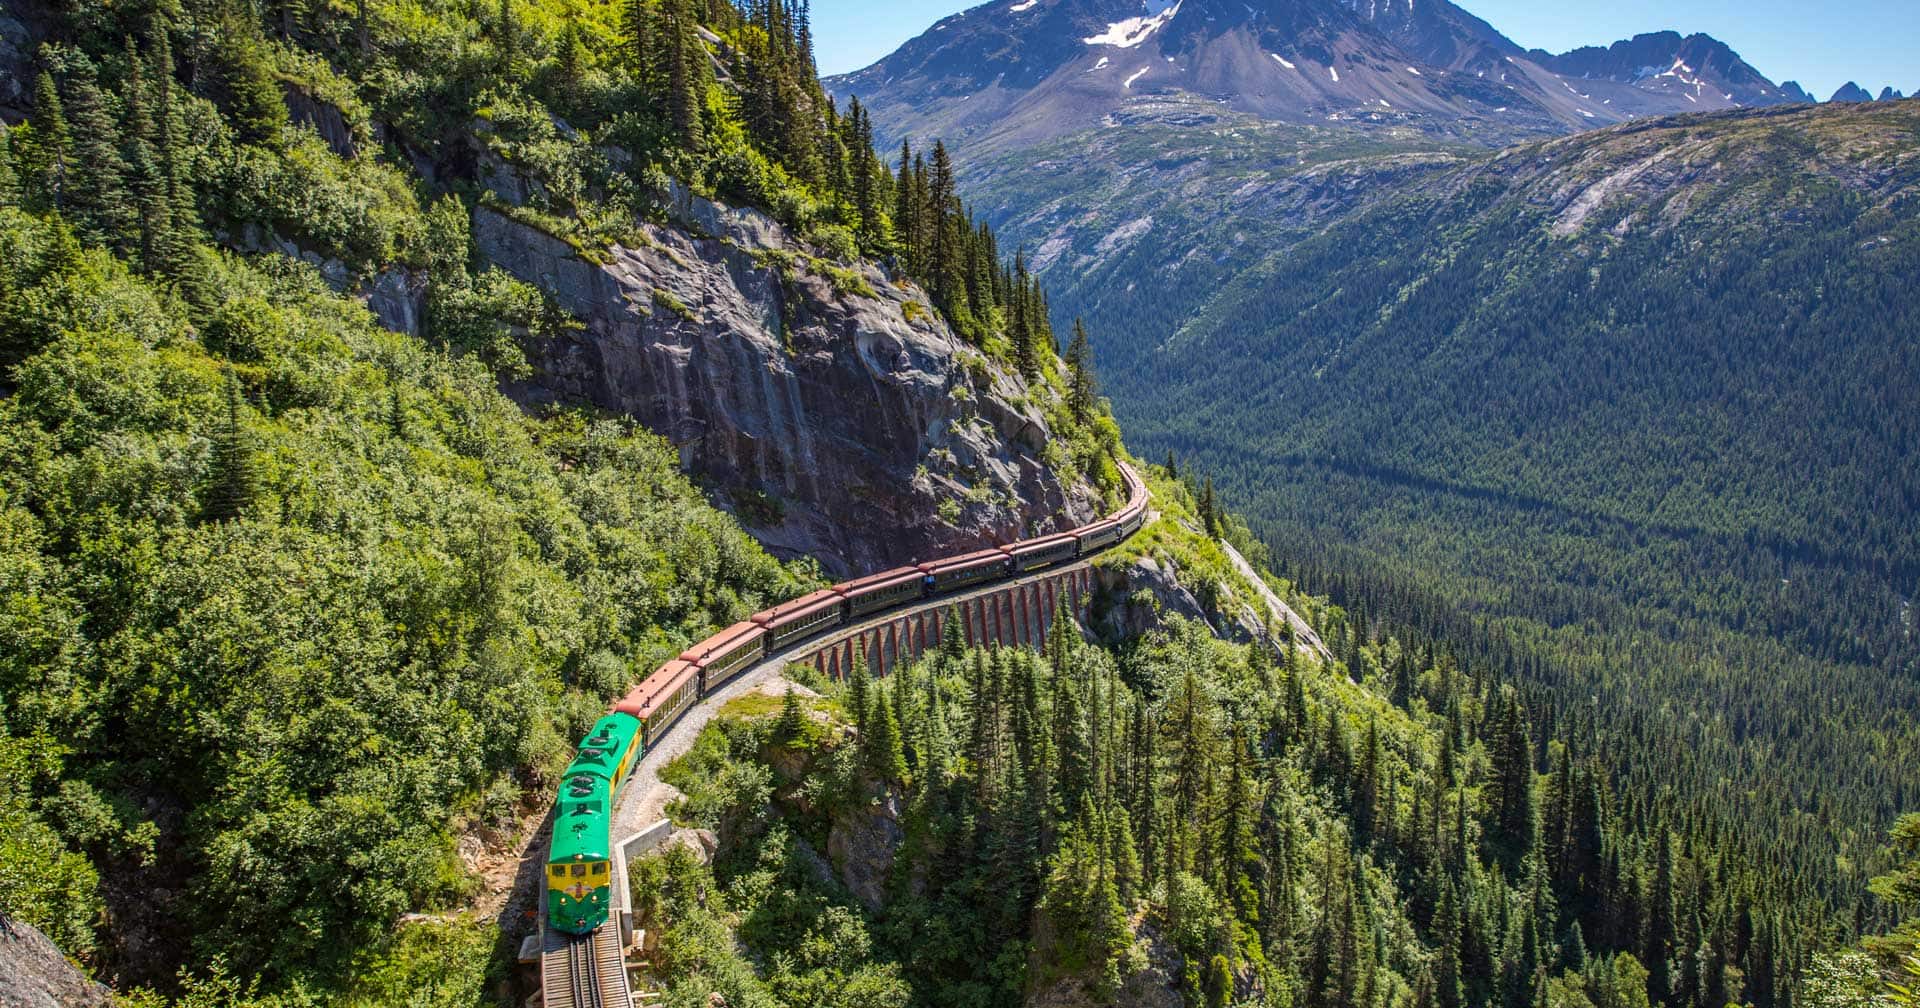 ncl excursions in skagway